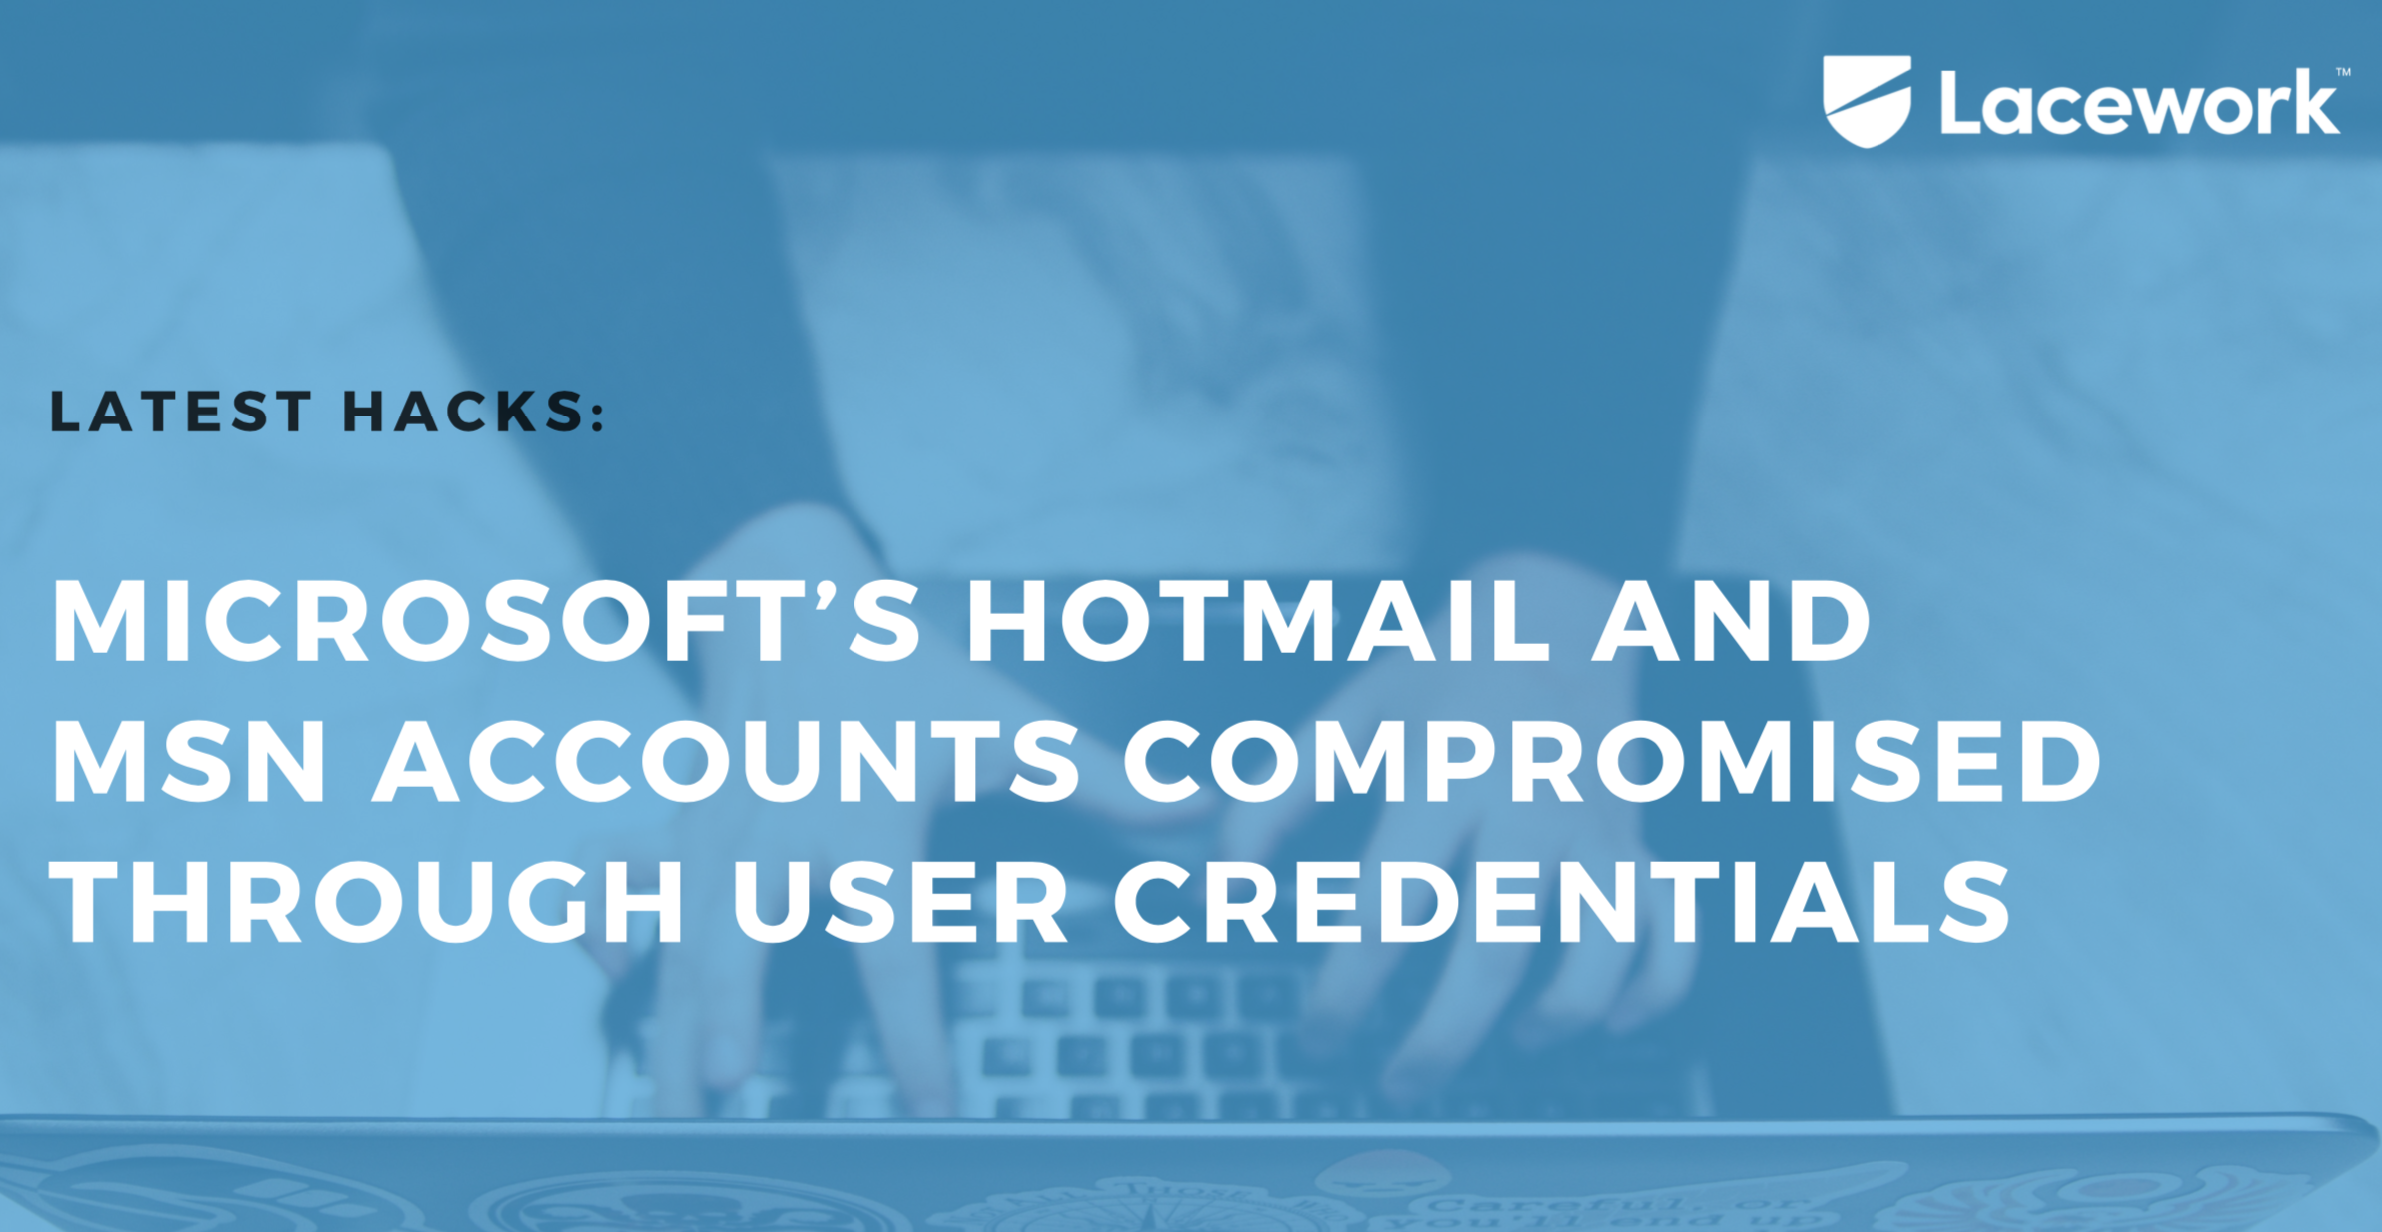 Latest Hacks: Microsoft's Hotmail, MSN Compromised With User Credentials